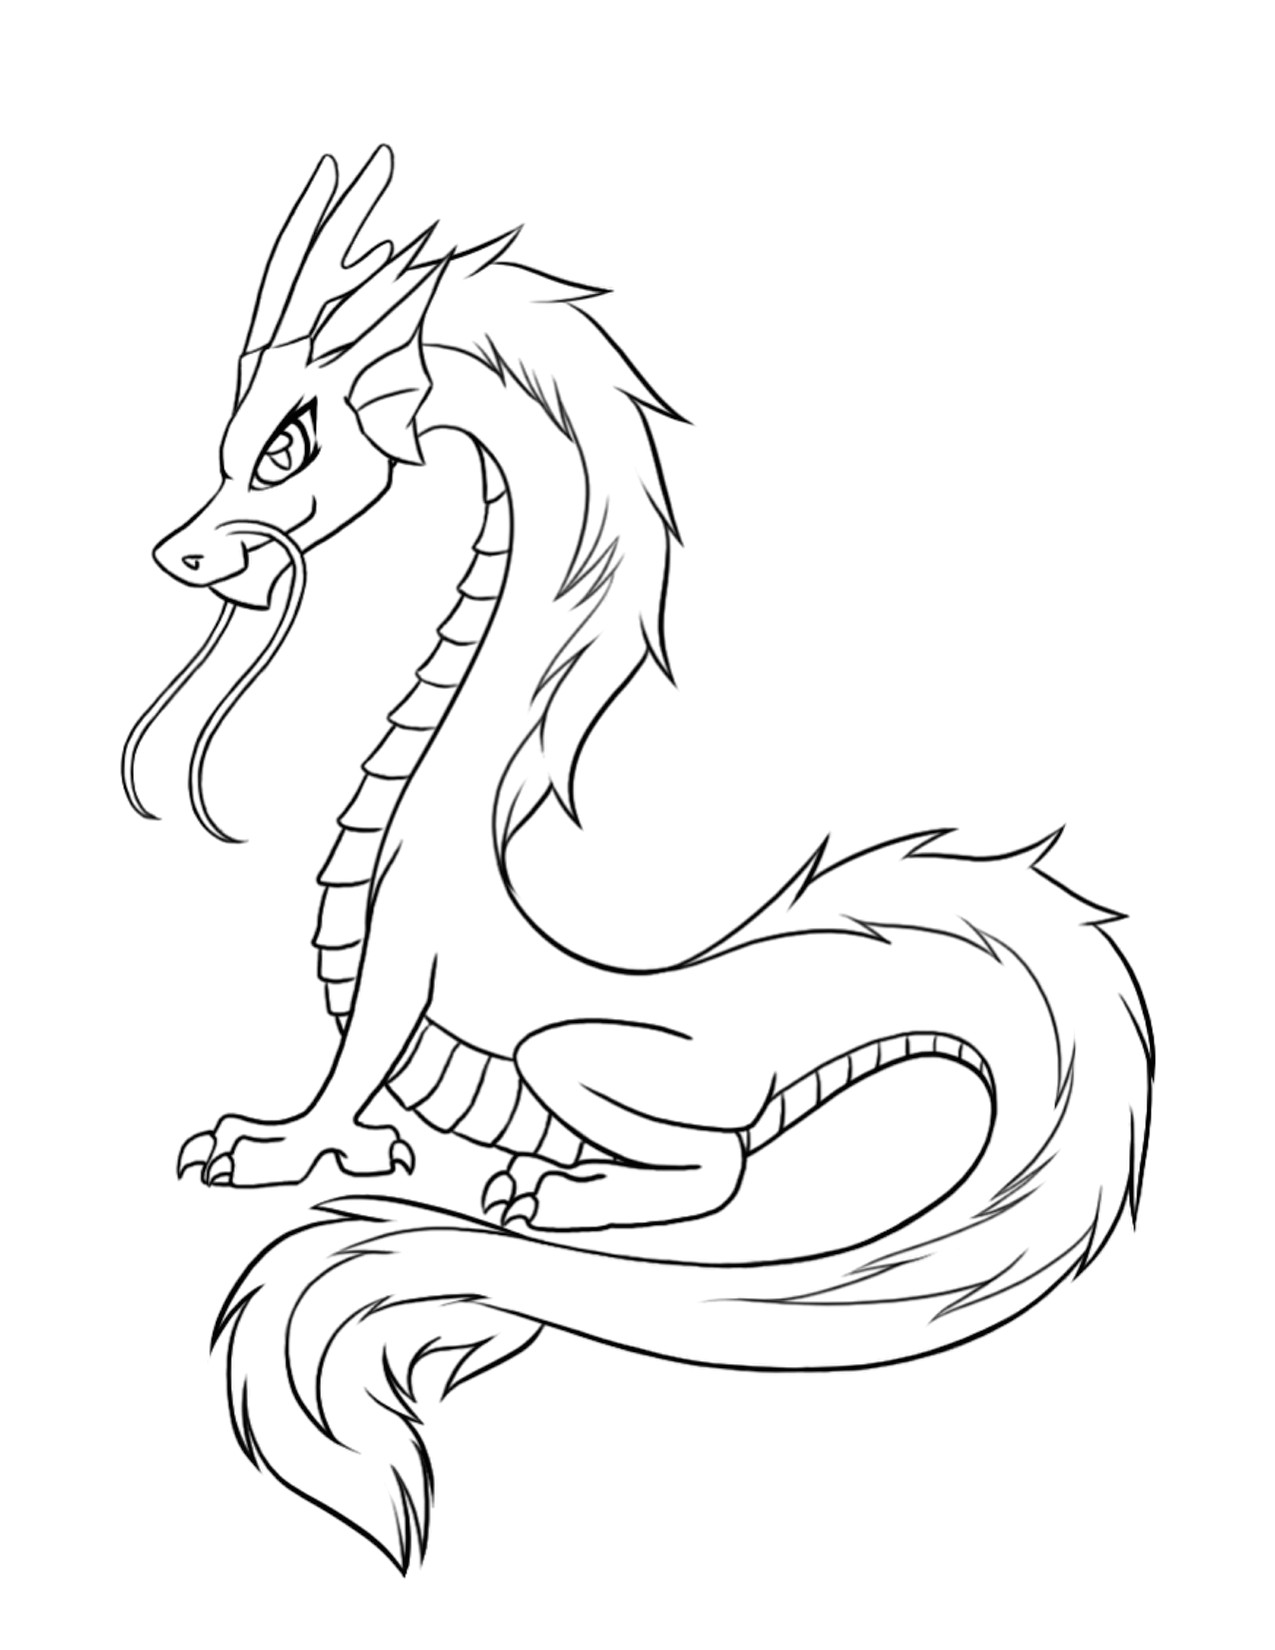 Easy Drawings Of Baby Dragons Free Printable Dragon Coloring Pages for Kids Dragon Sketch